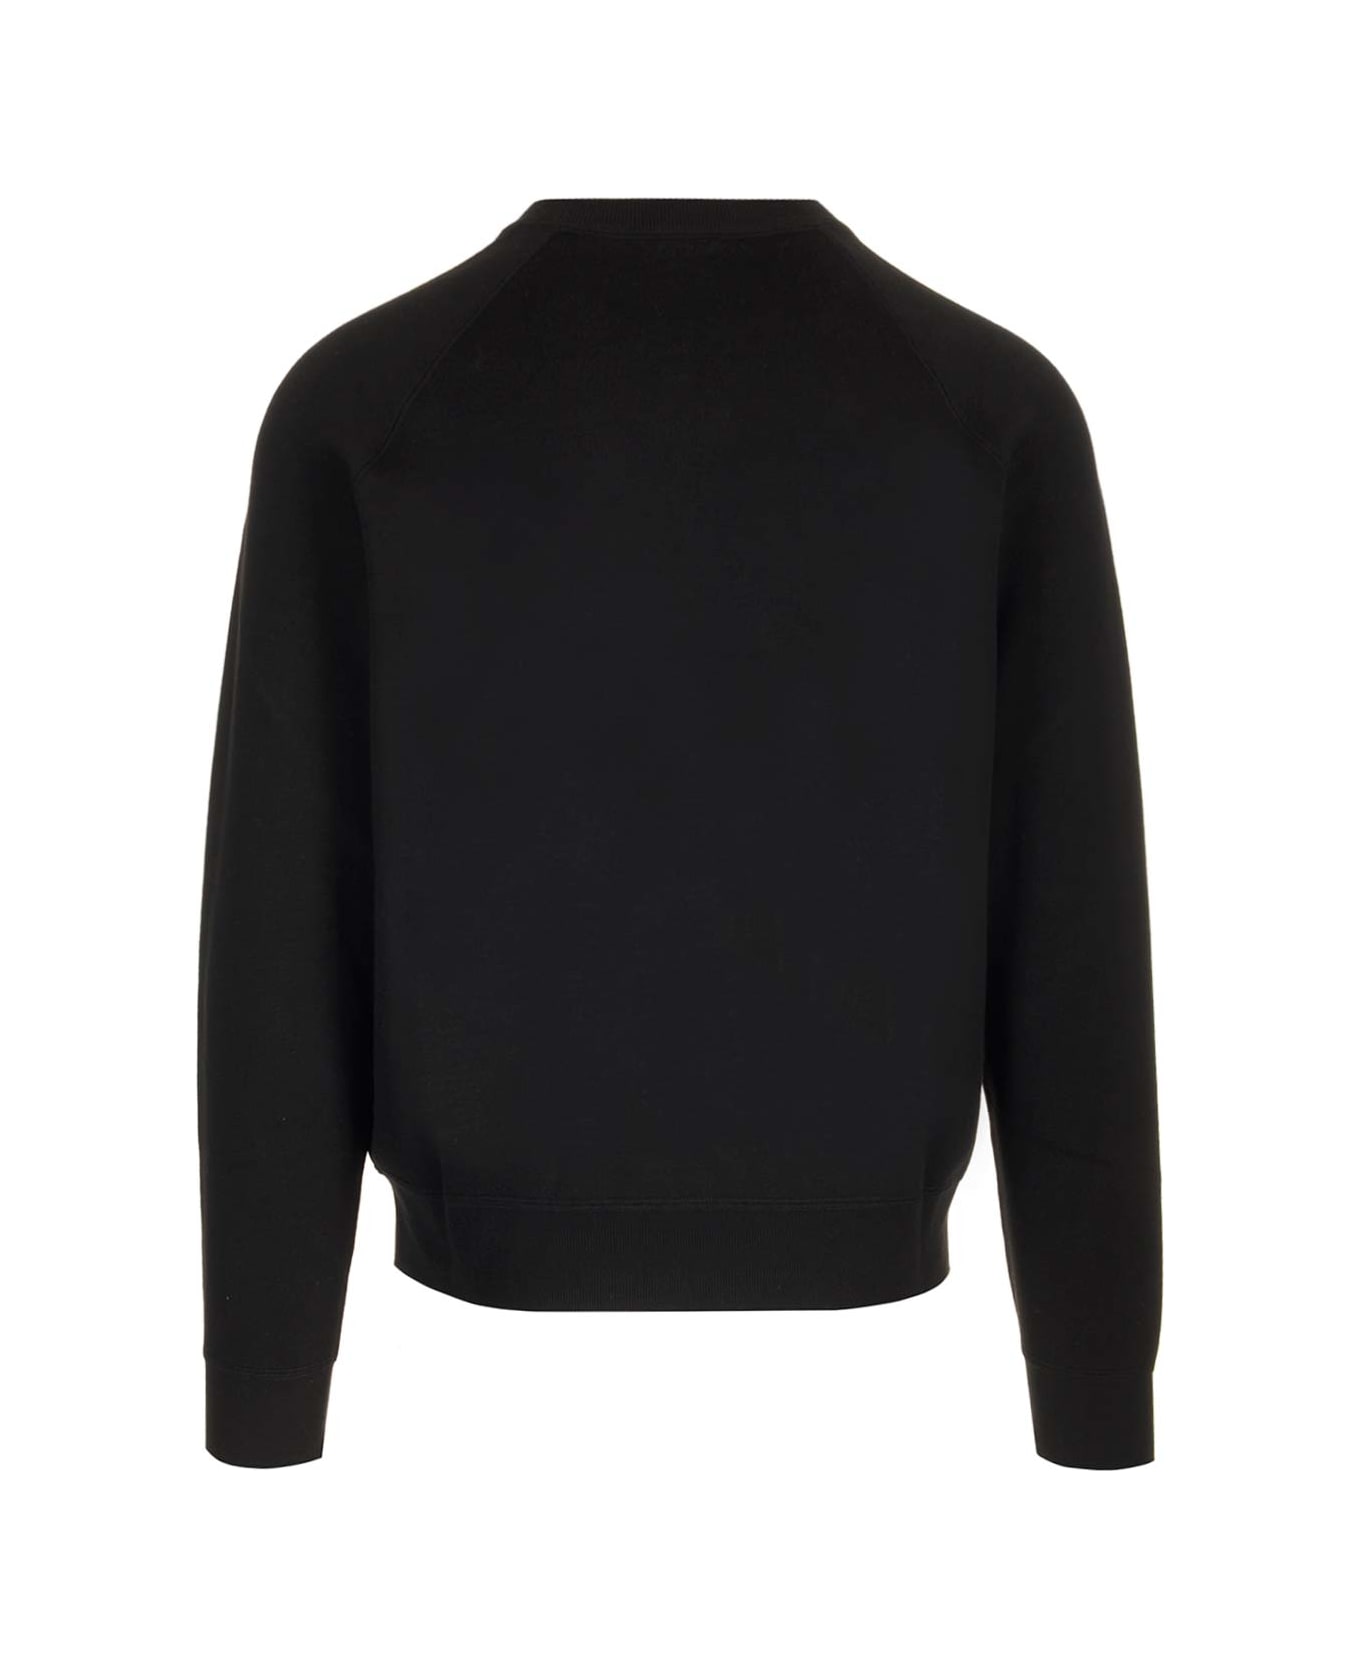 Tom Ford Double Face Sweater - Black